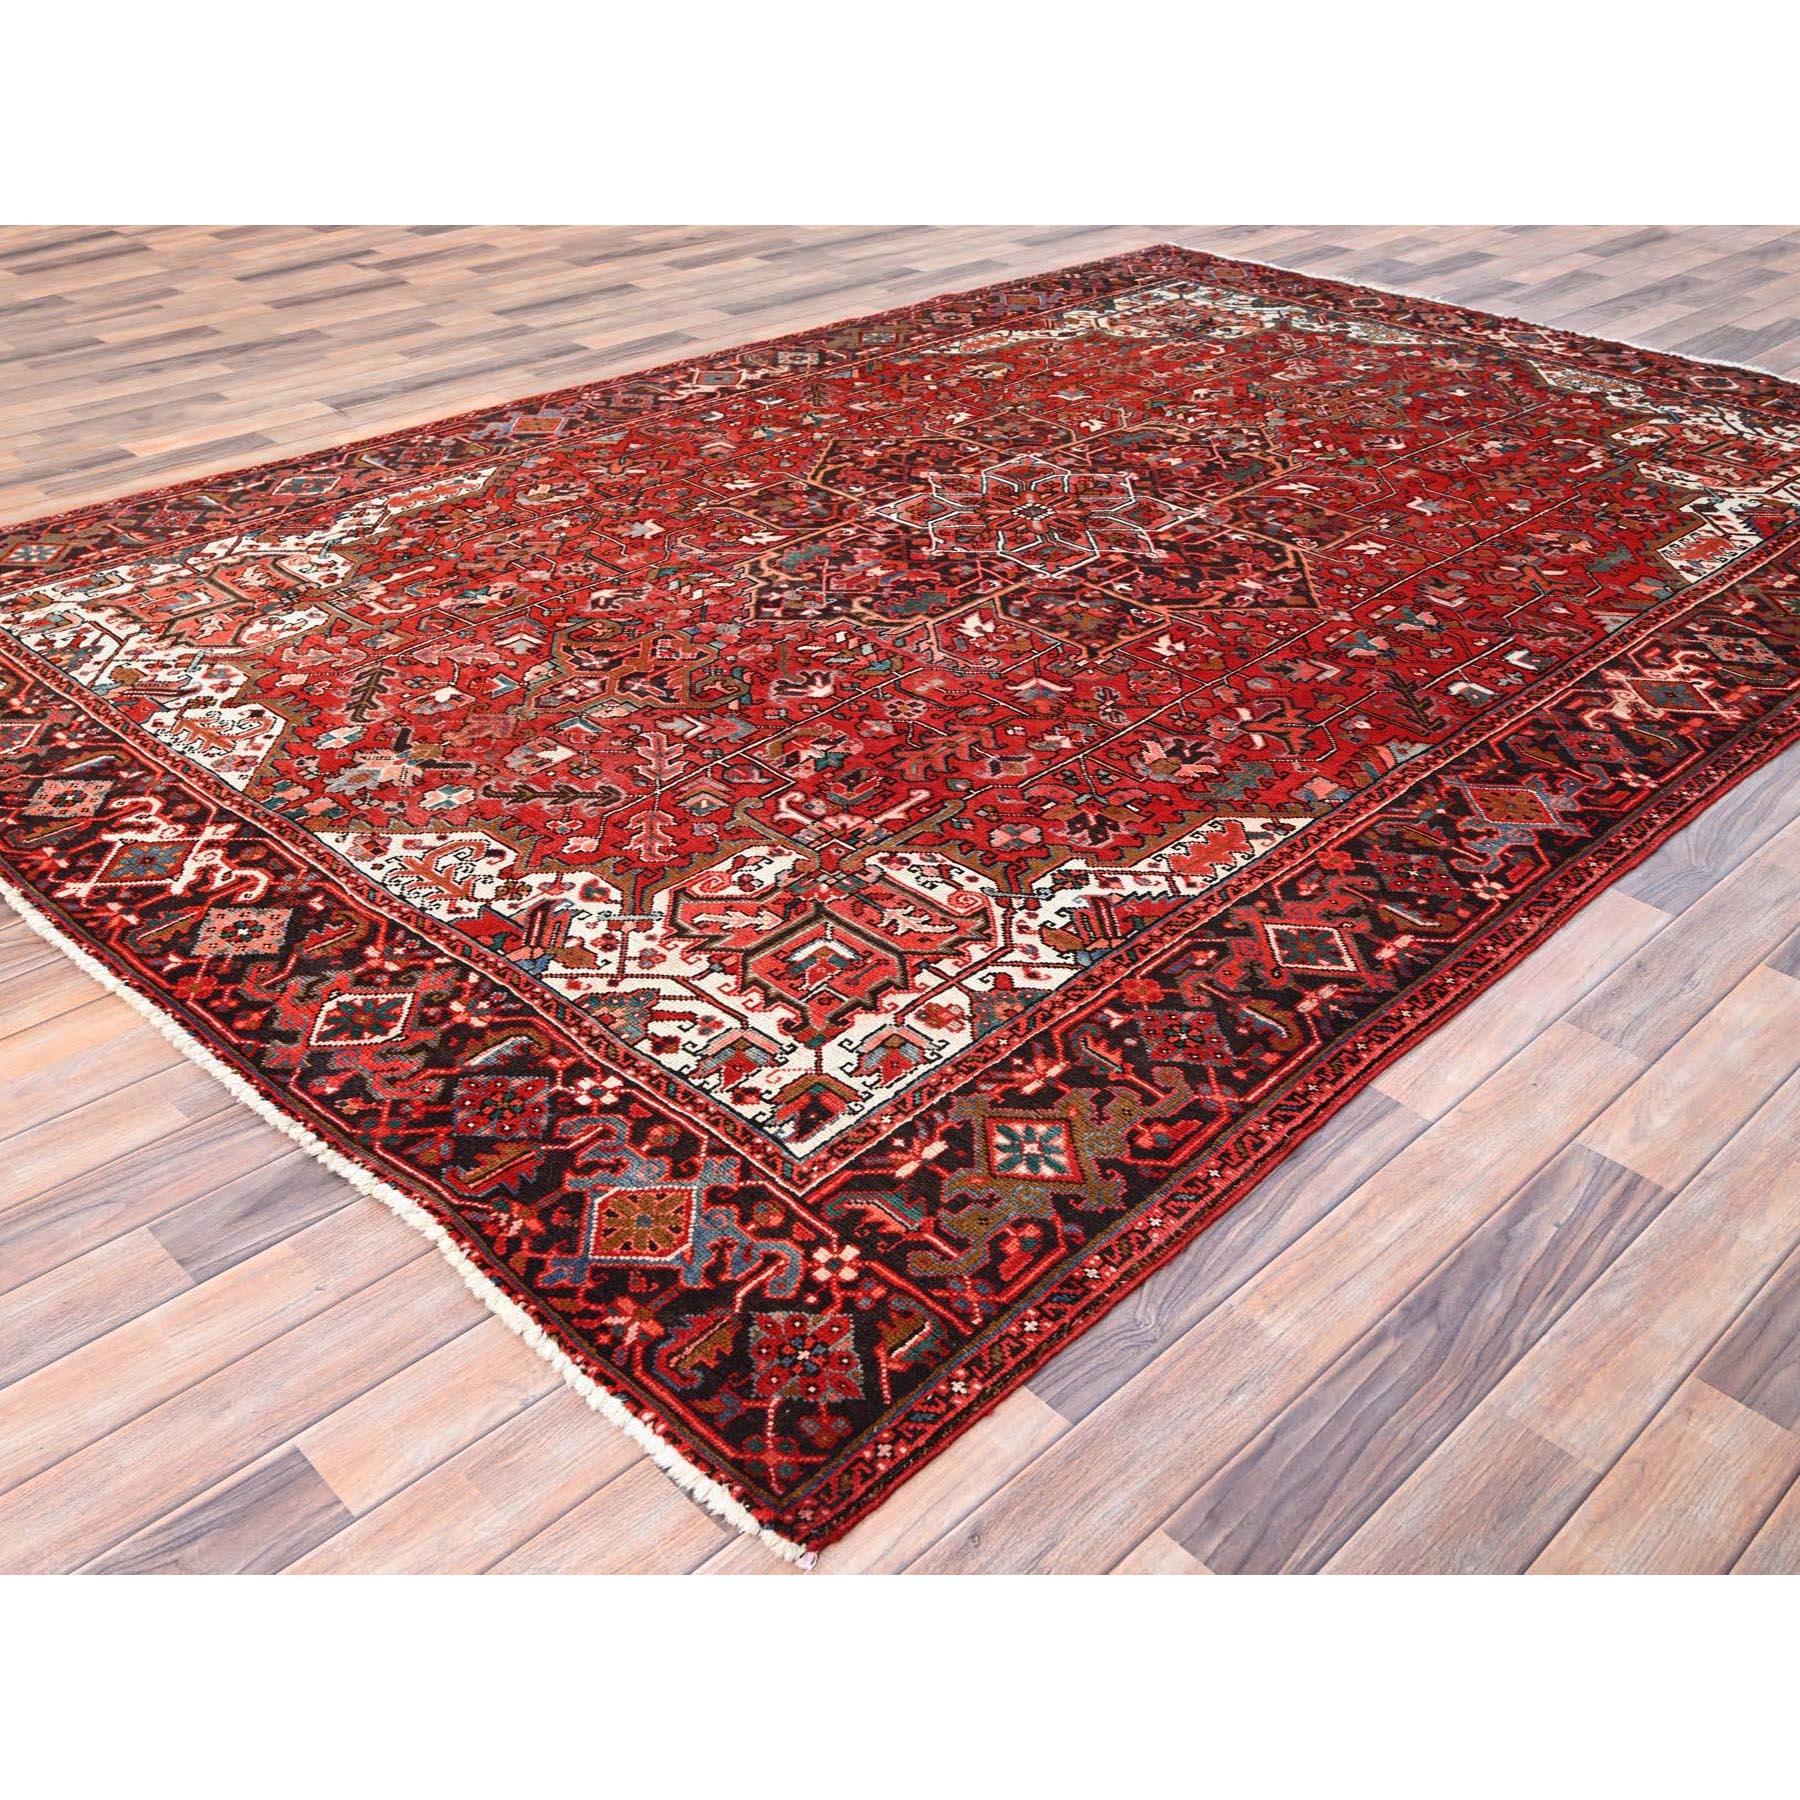 Red Rustic Look Worn Wool Hand Knotted Vintage Persian Heriz Tribal Ambience Rug In Good Condition For Sale In Carlstadt, NJ